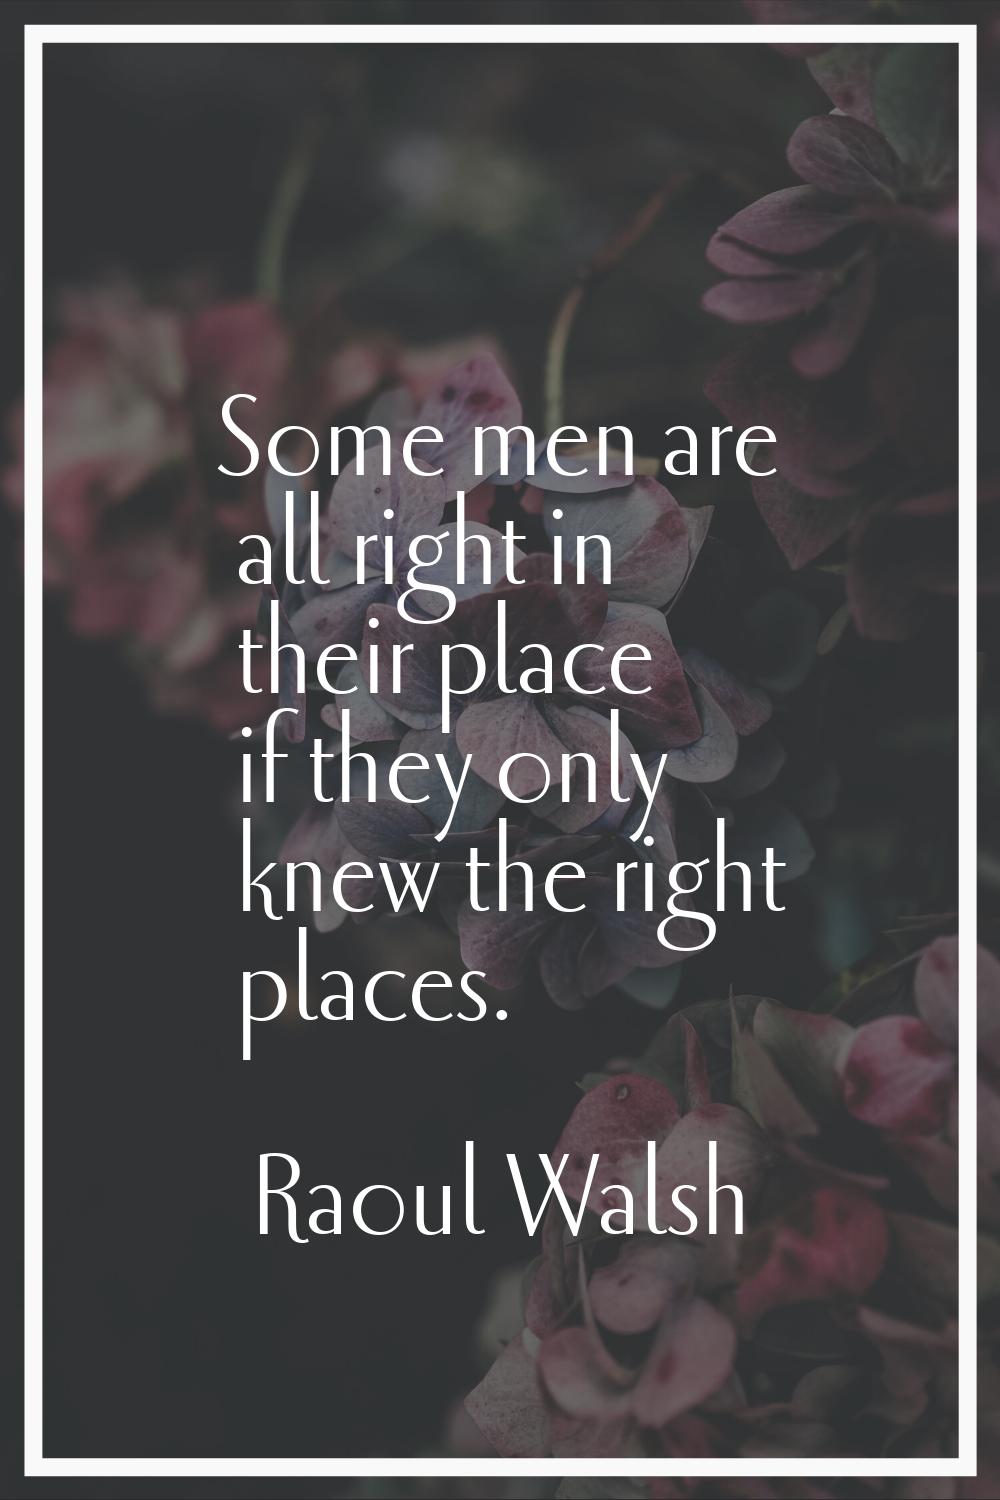 Some men are all right in their place if they only knew the right places.